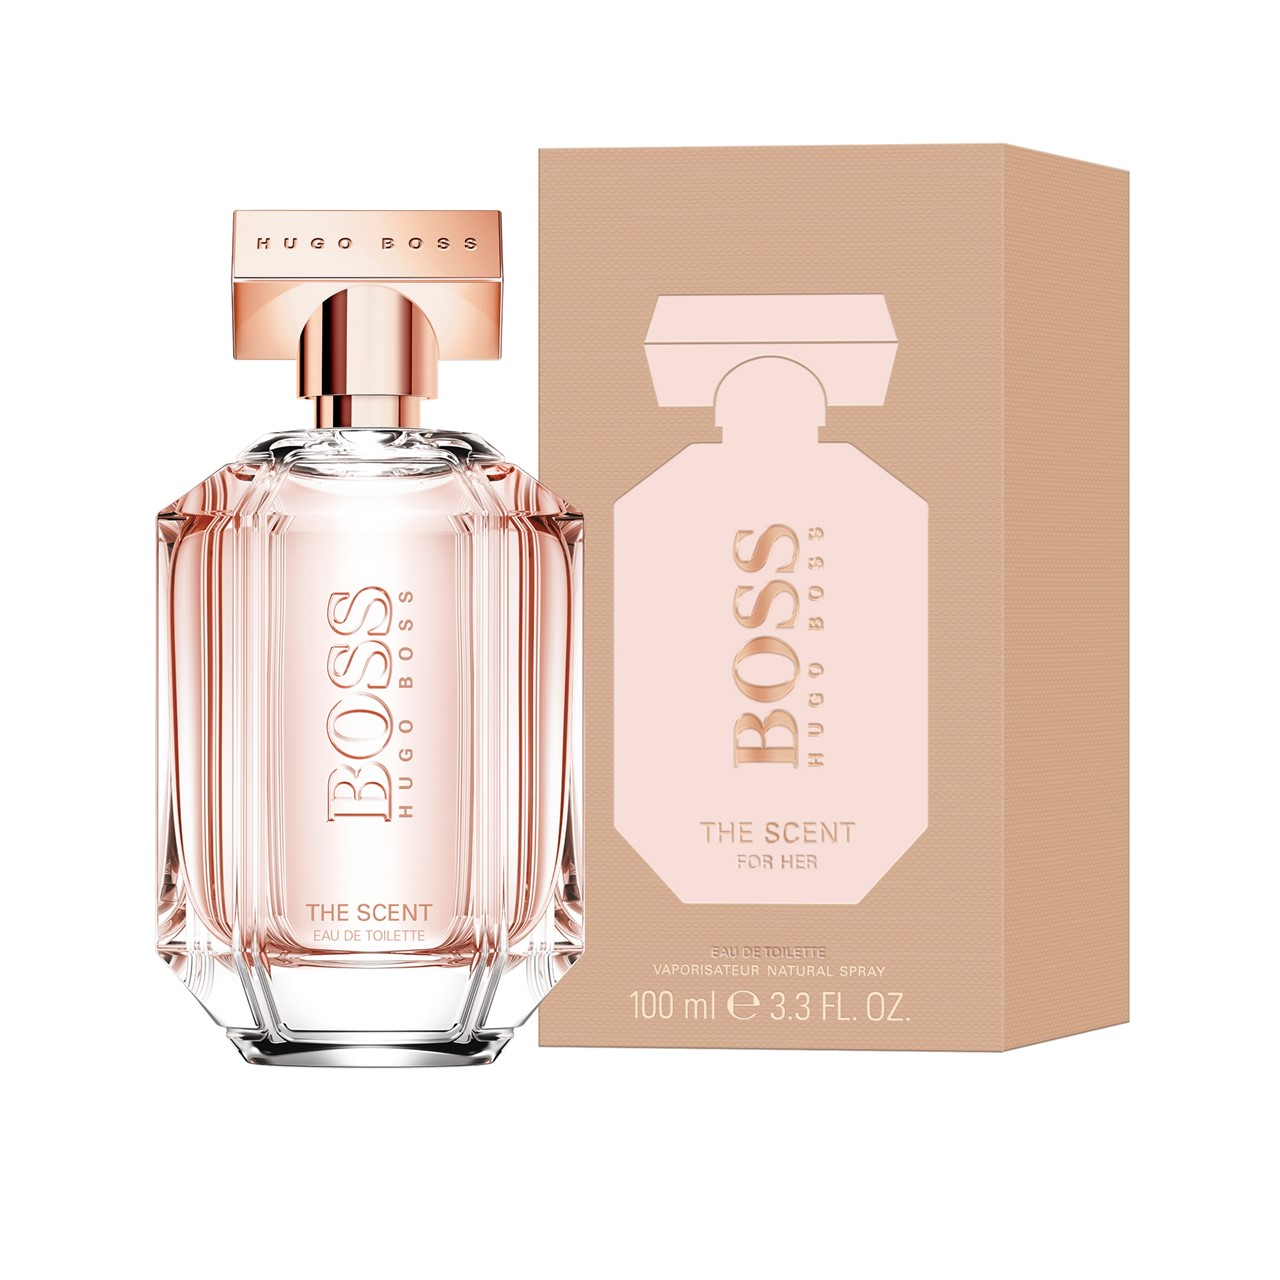 Hugo Boss The Scent For Her 100ml – The House of Lipstick